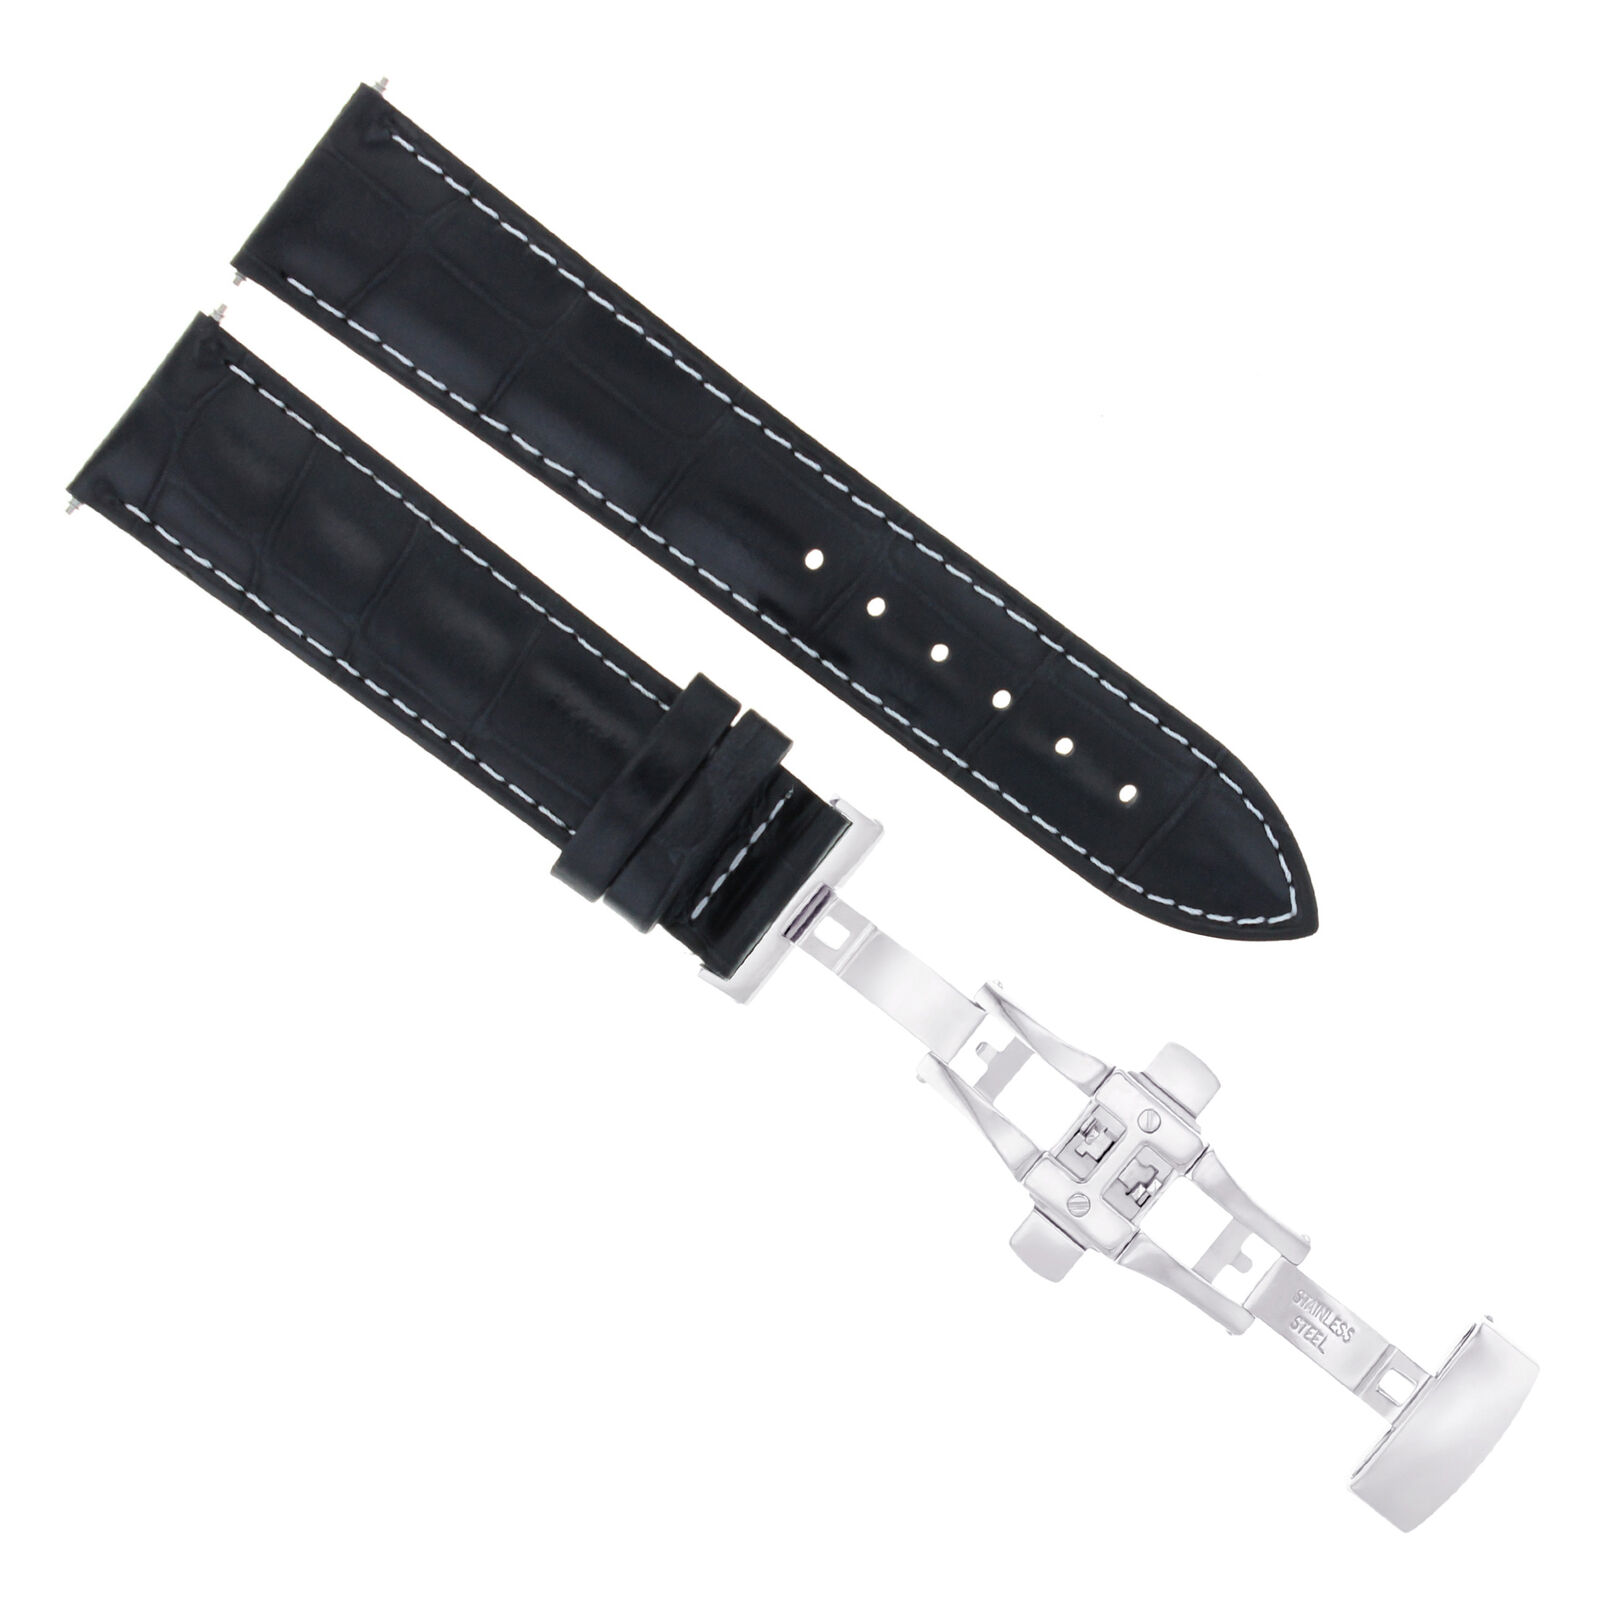 20MM LEATHER WATCH BAND STRAP DEPLOYMENT CLASP FOR PANERAI PILOT WATCH BLACK WS